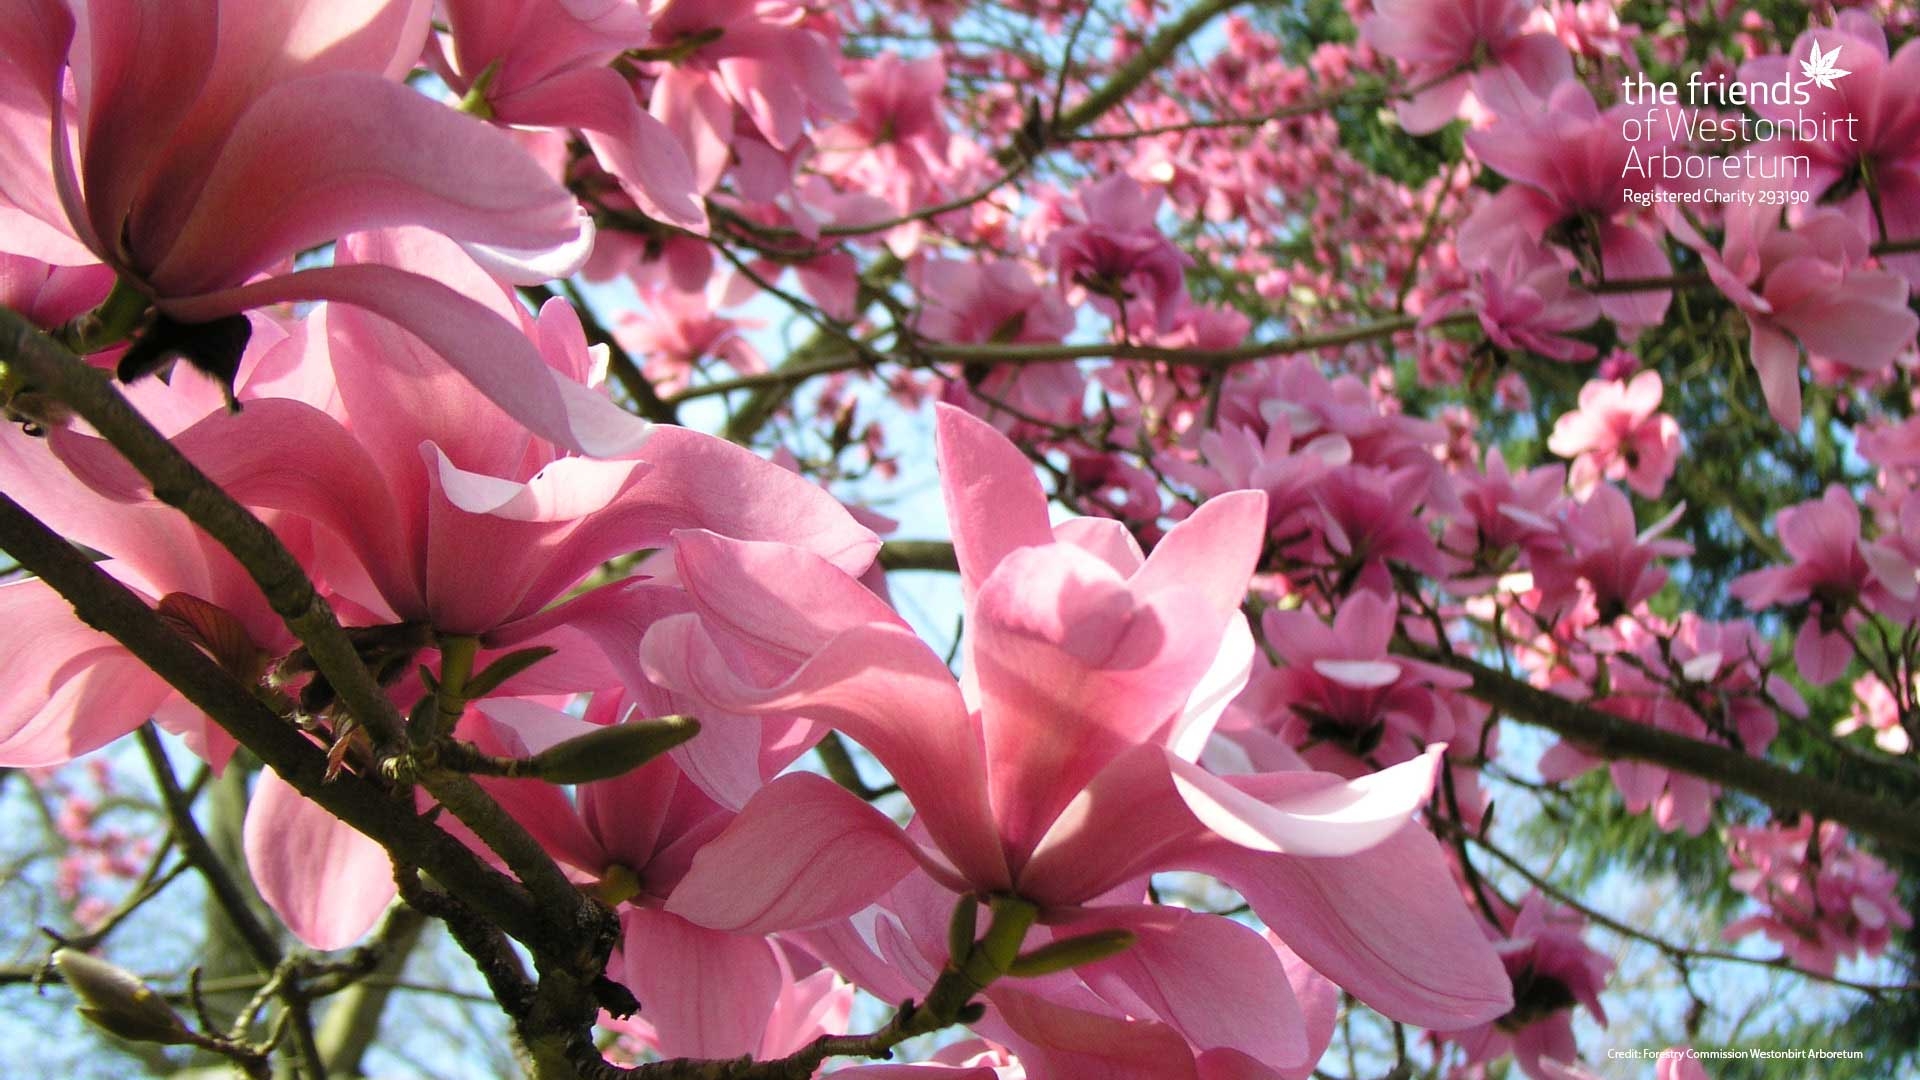 Hundreds of dusty pink magnolia flowers cover the tree's branches